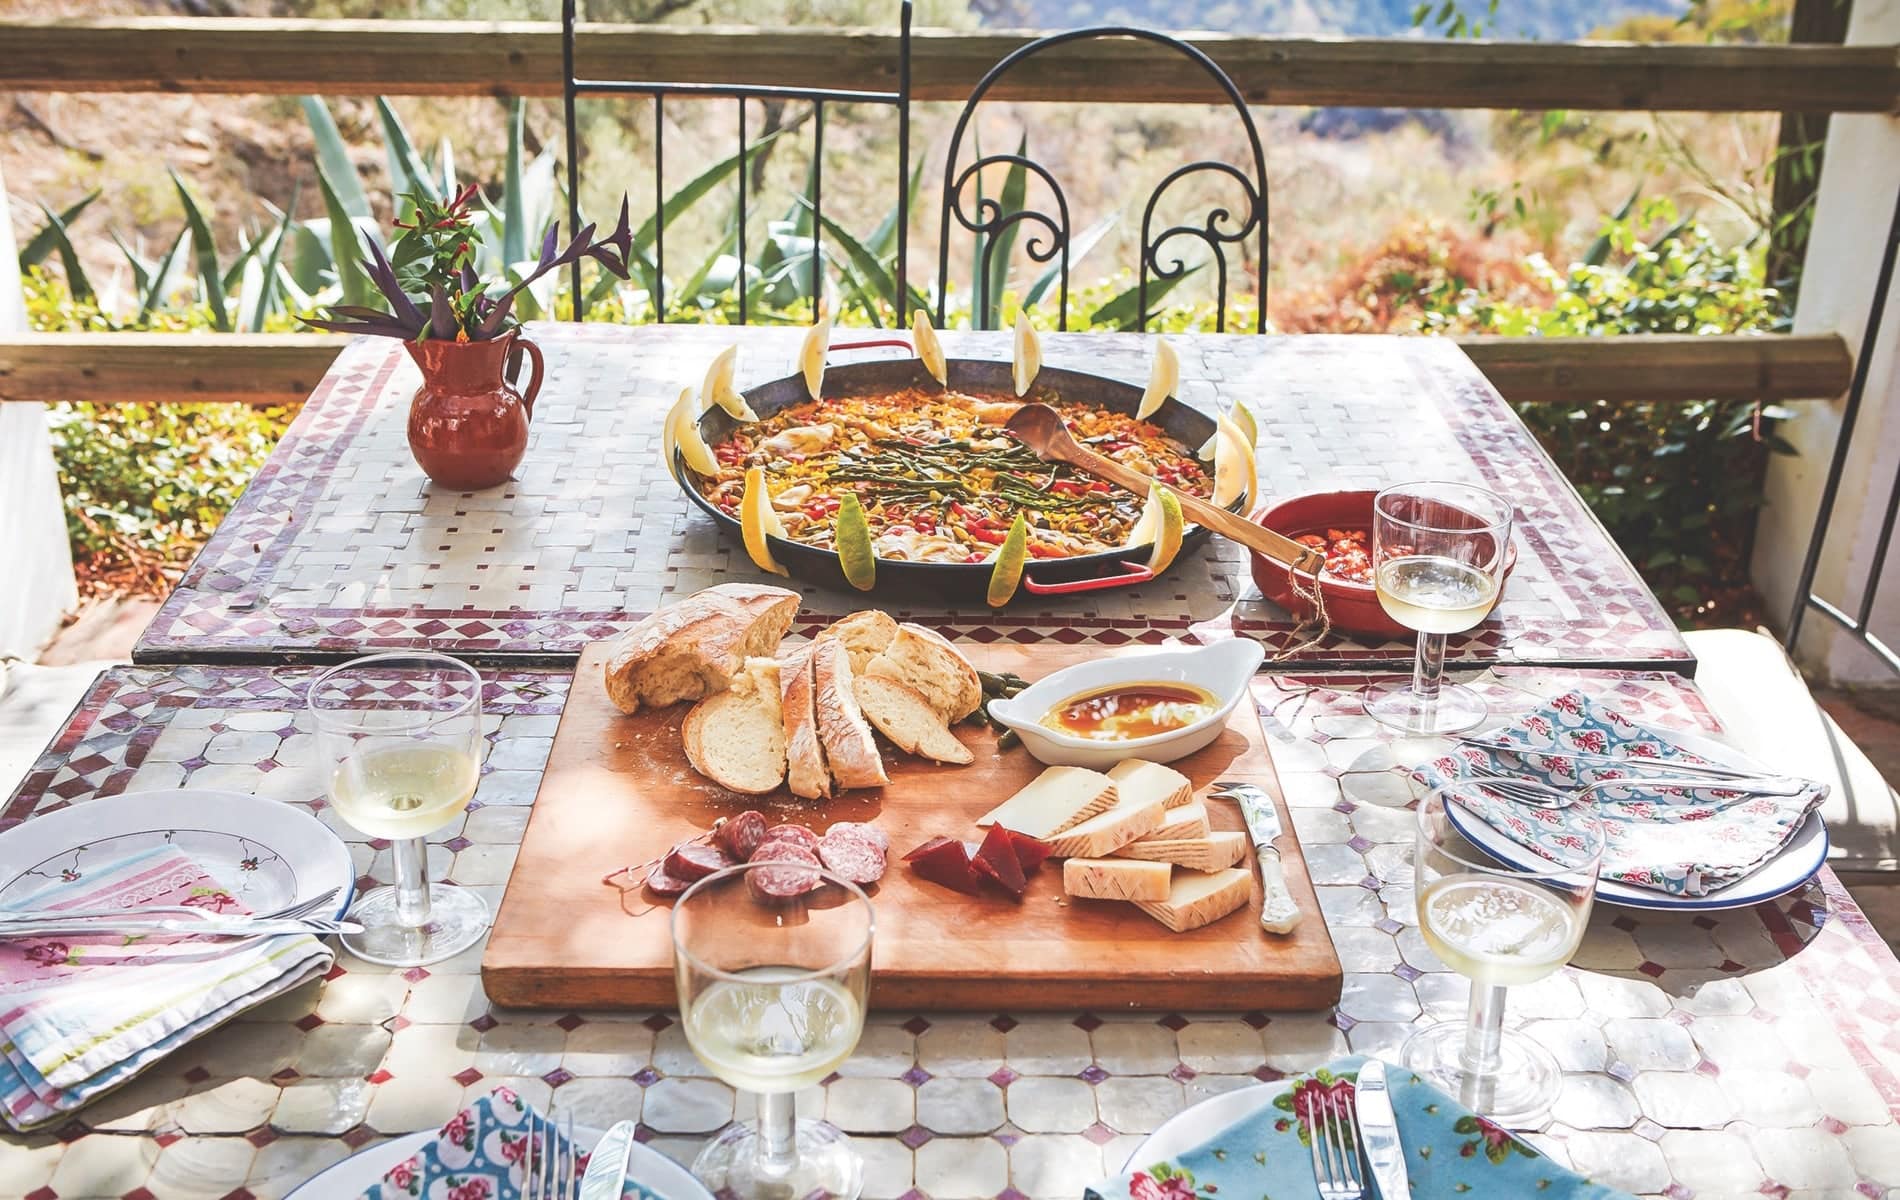 A seafood paella preceded by cheese, charcuterie, and bread with good olive oil is the quintessential Spanish celebration feast.